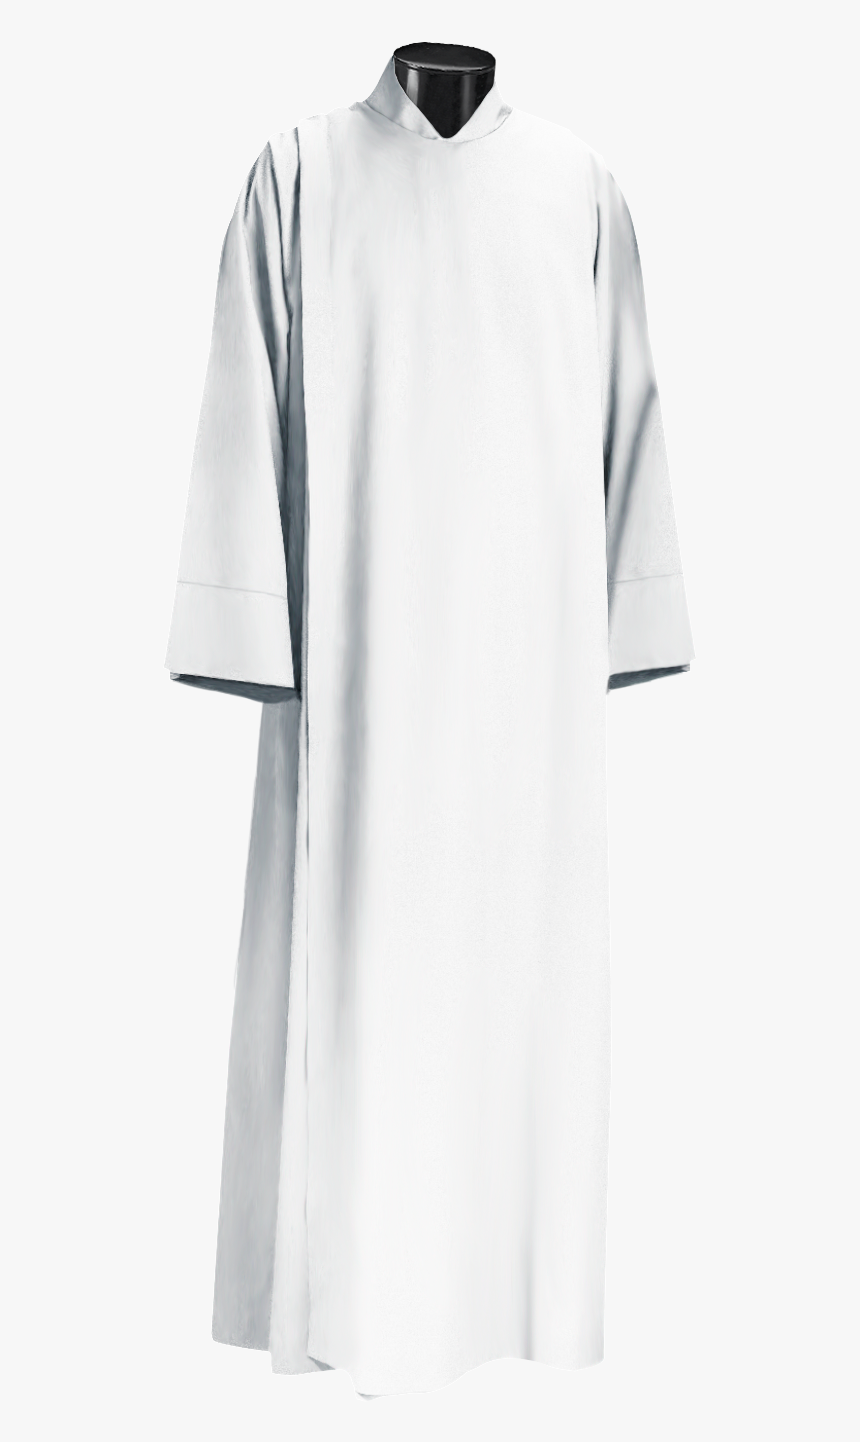 55 Front Side Opening Robe White - No Opening Robe, HD Png Download, Free Download